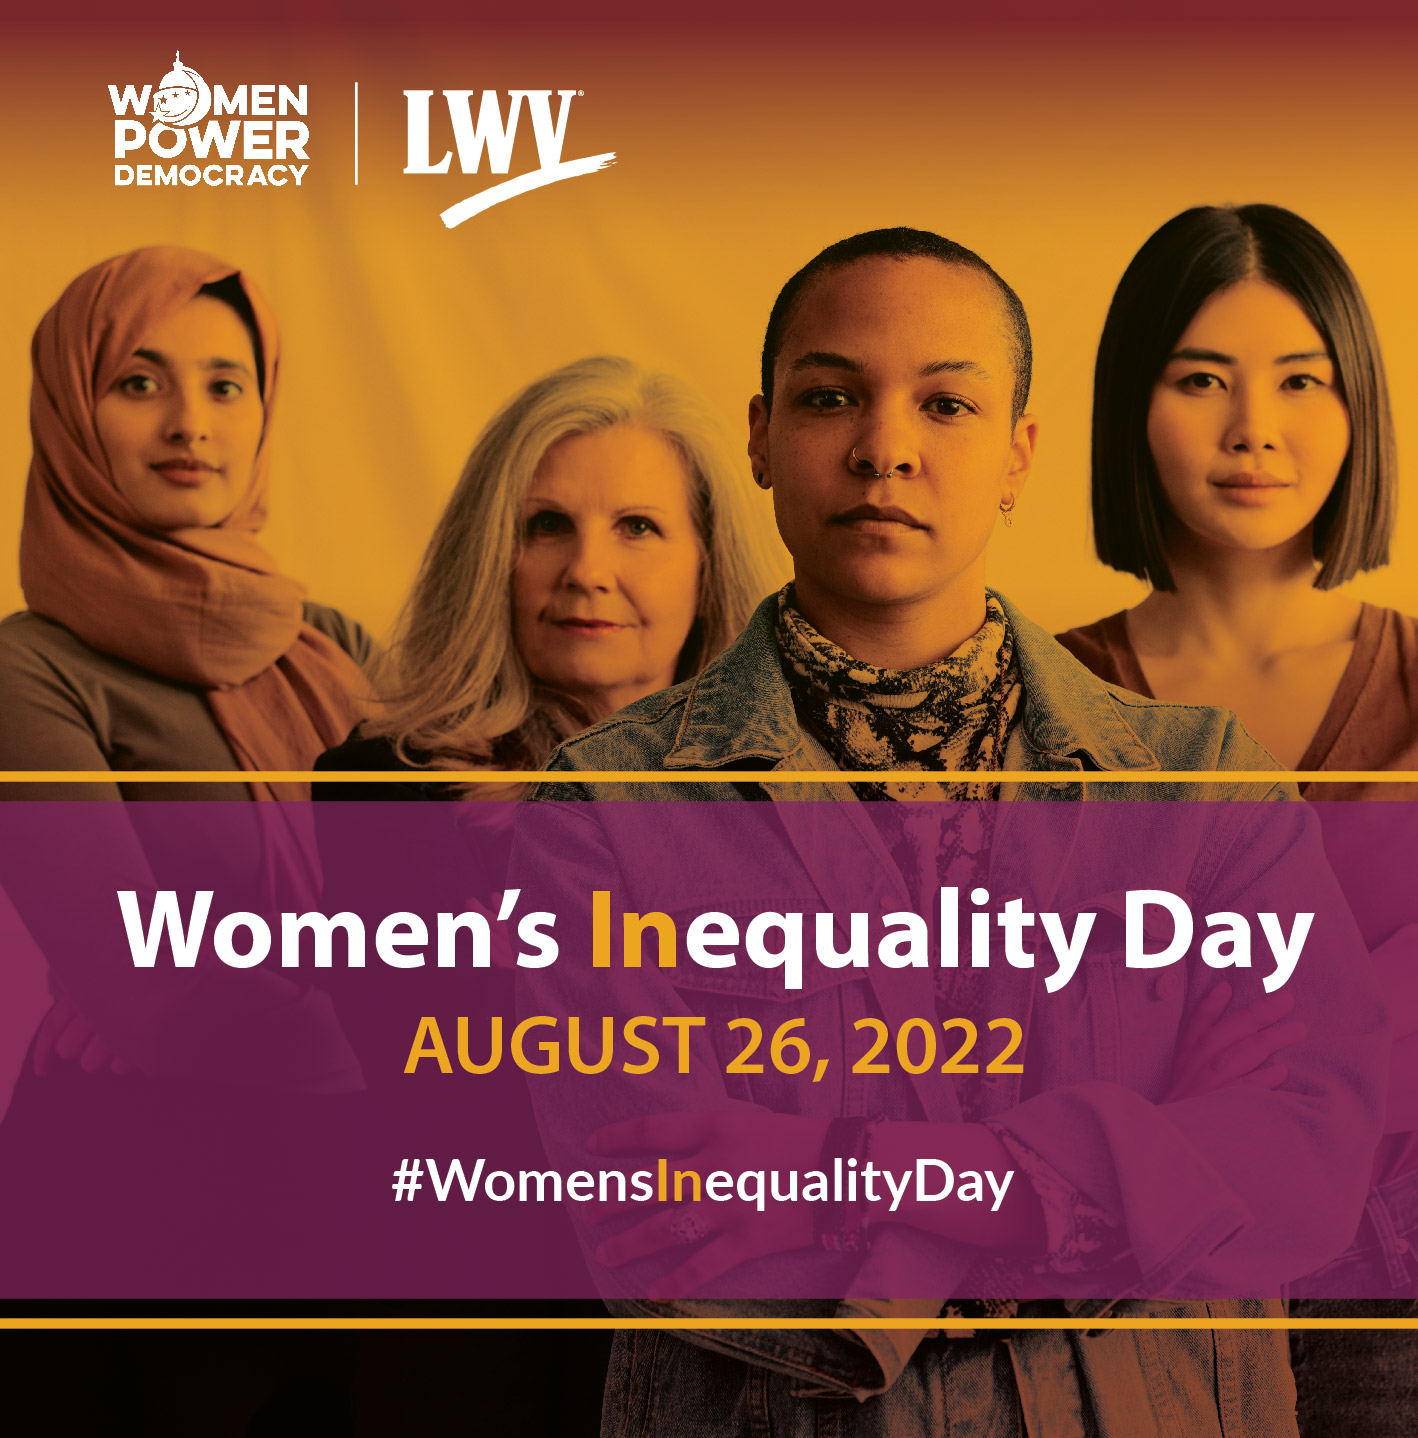 Four women facing camera with Womens Inequality Day text overlay